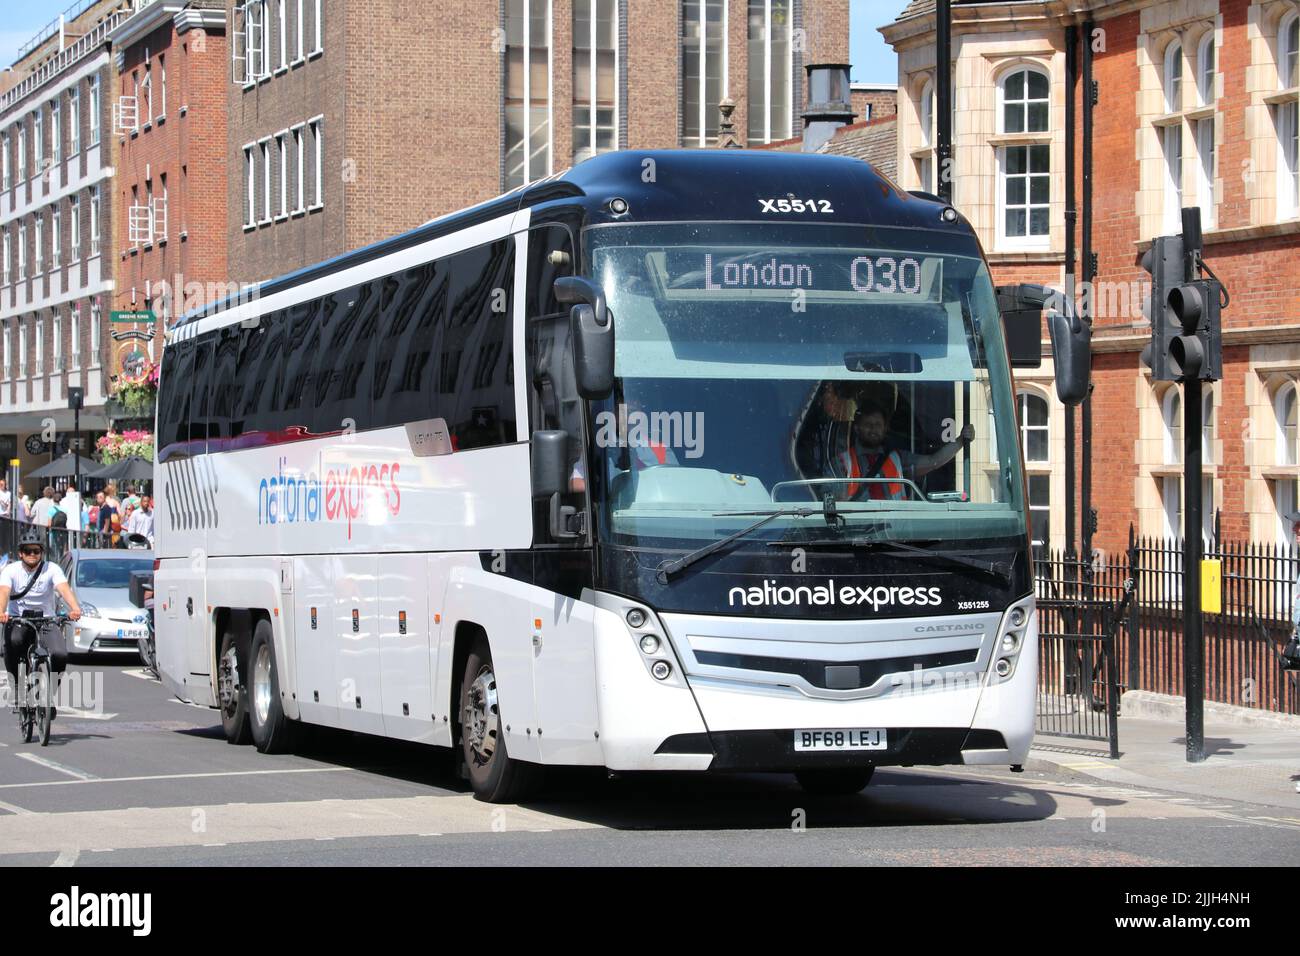 NATIONAL EXPRESS COACH IN LONDON Stock Photo